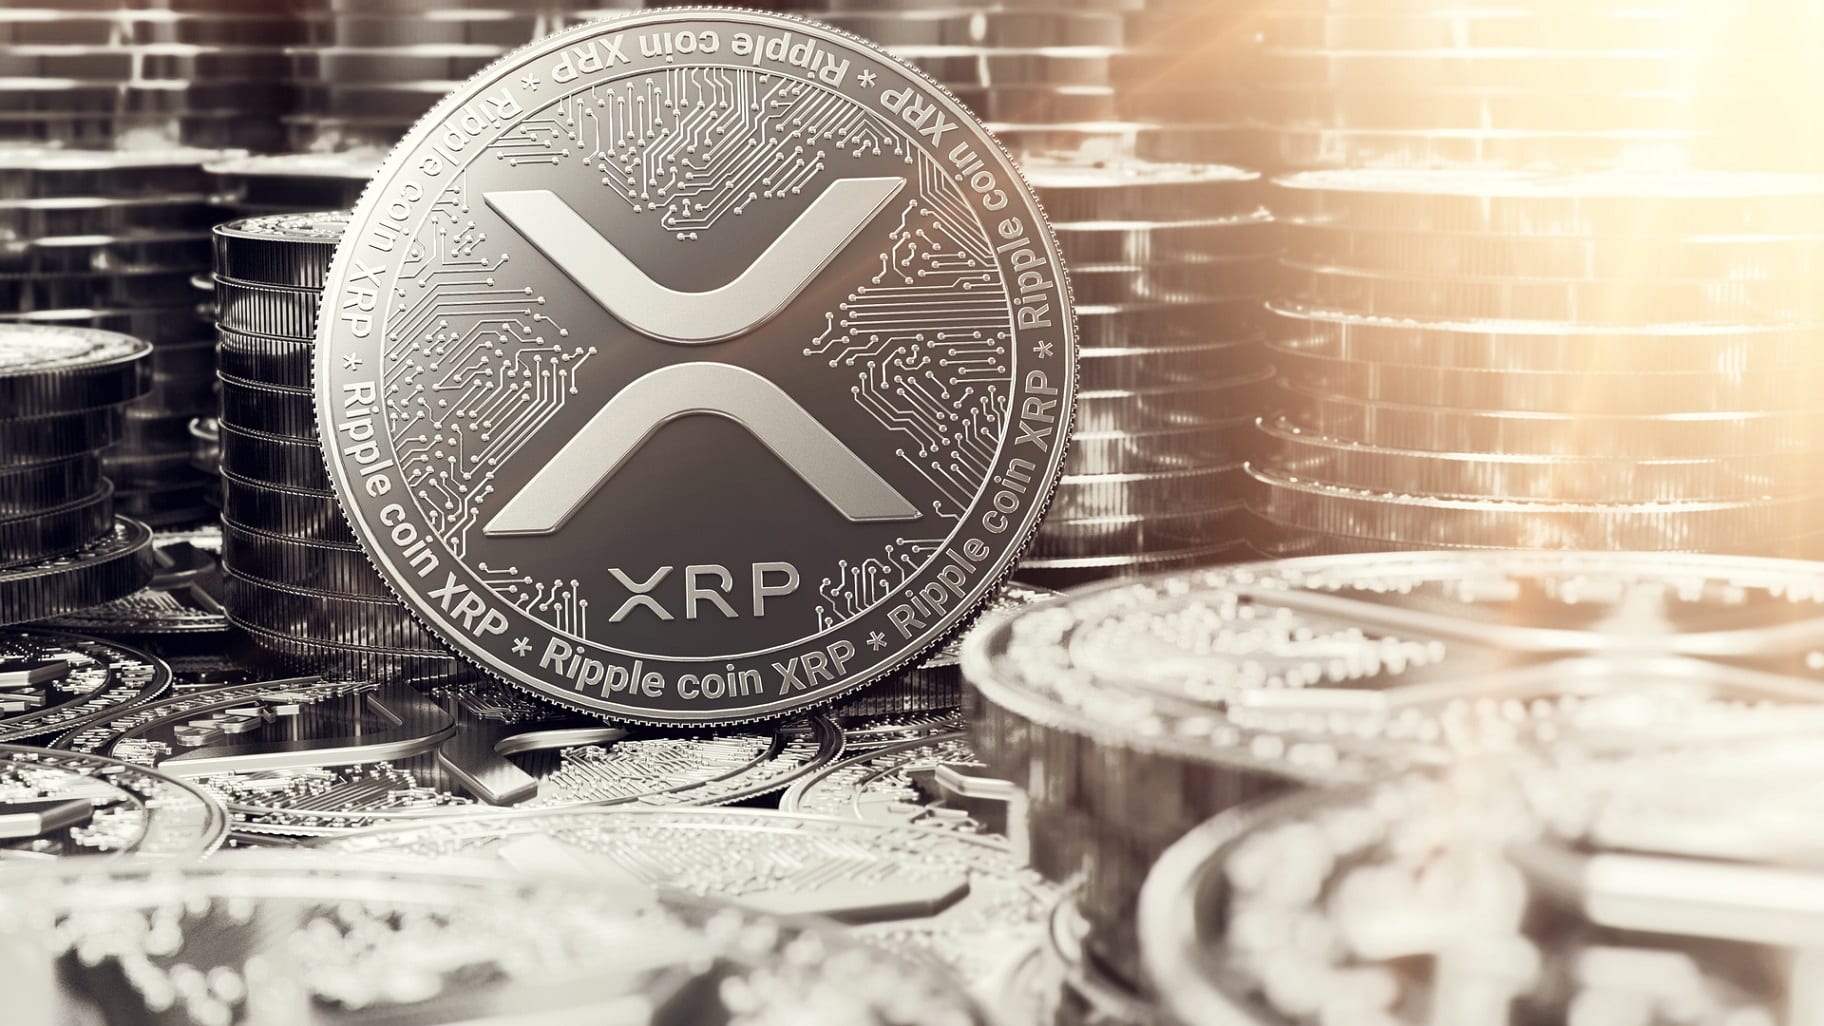 XRP from Ripple is the most suitable tool for cryptocurrency payments